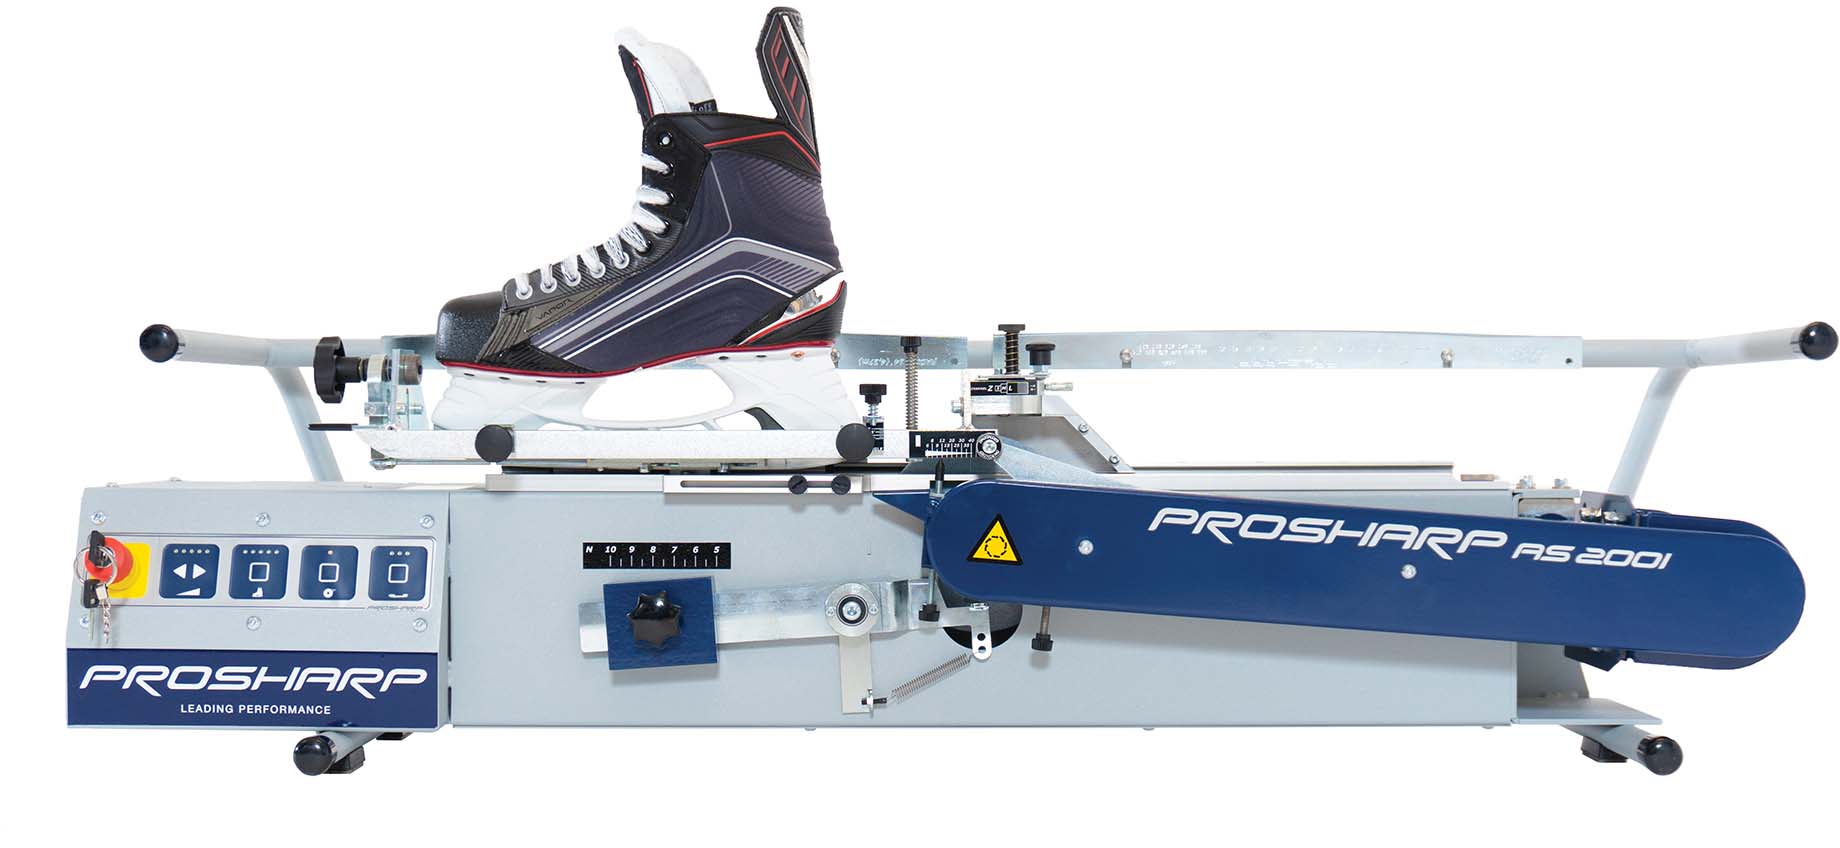 Ski service skate grinding machines AS 2001 ALLPRO front view